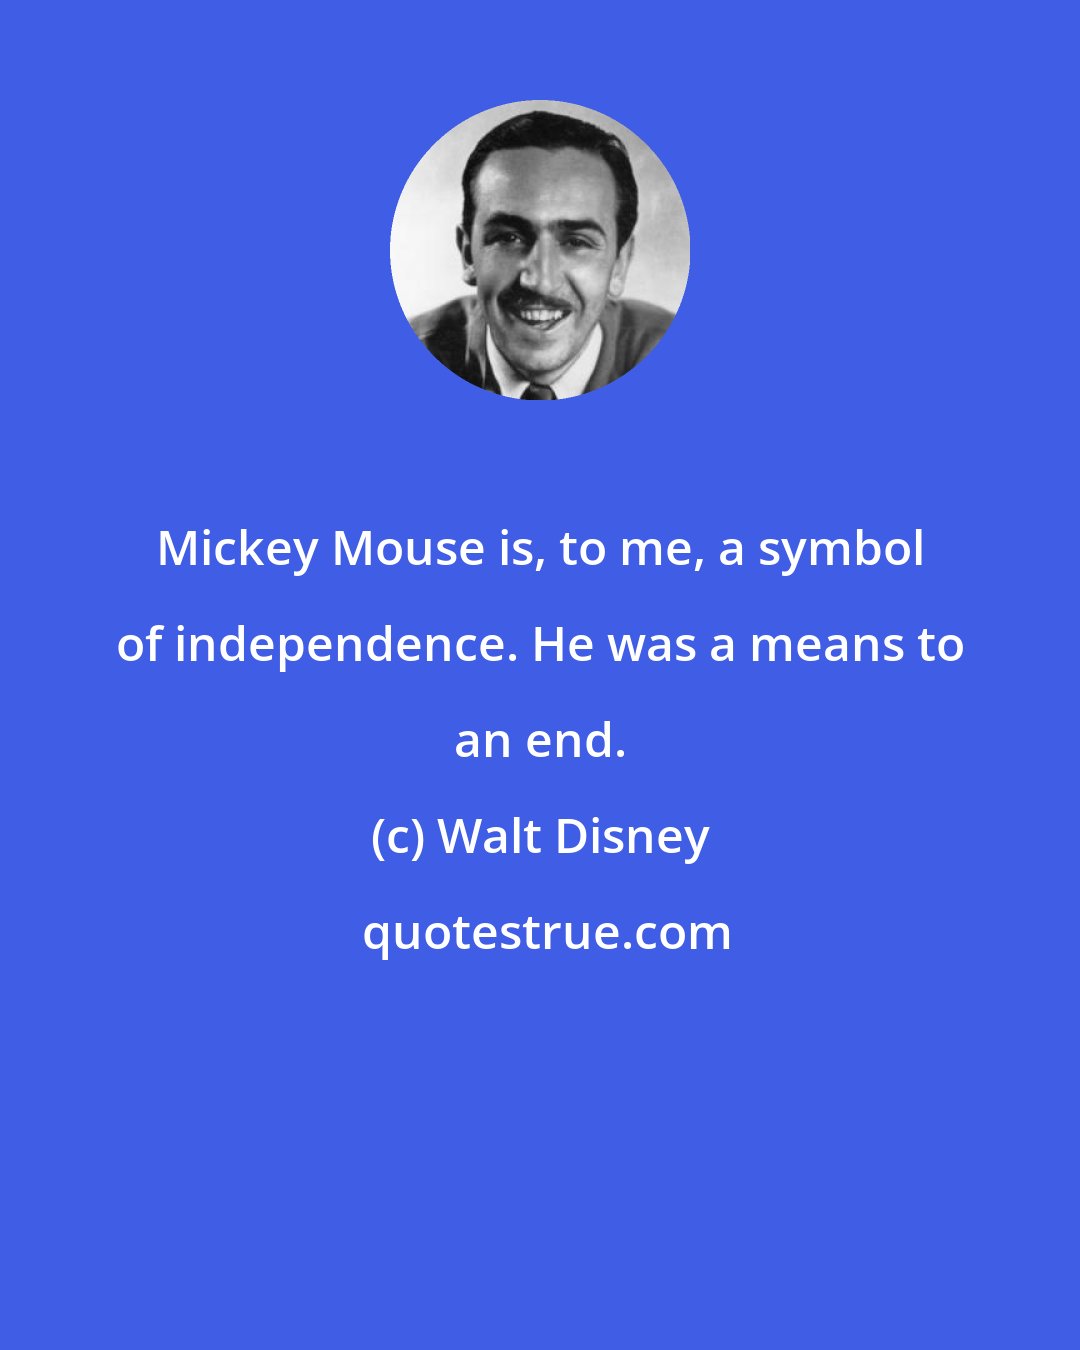 Walt Disney: Mickey Mouse is, to me, a symbol of independence. He was a means to an end.